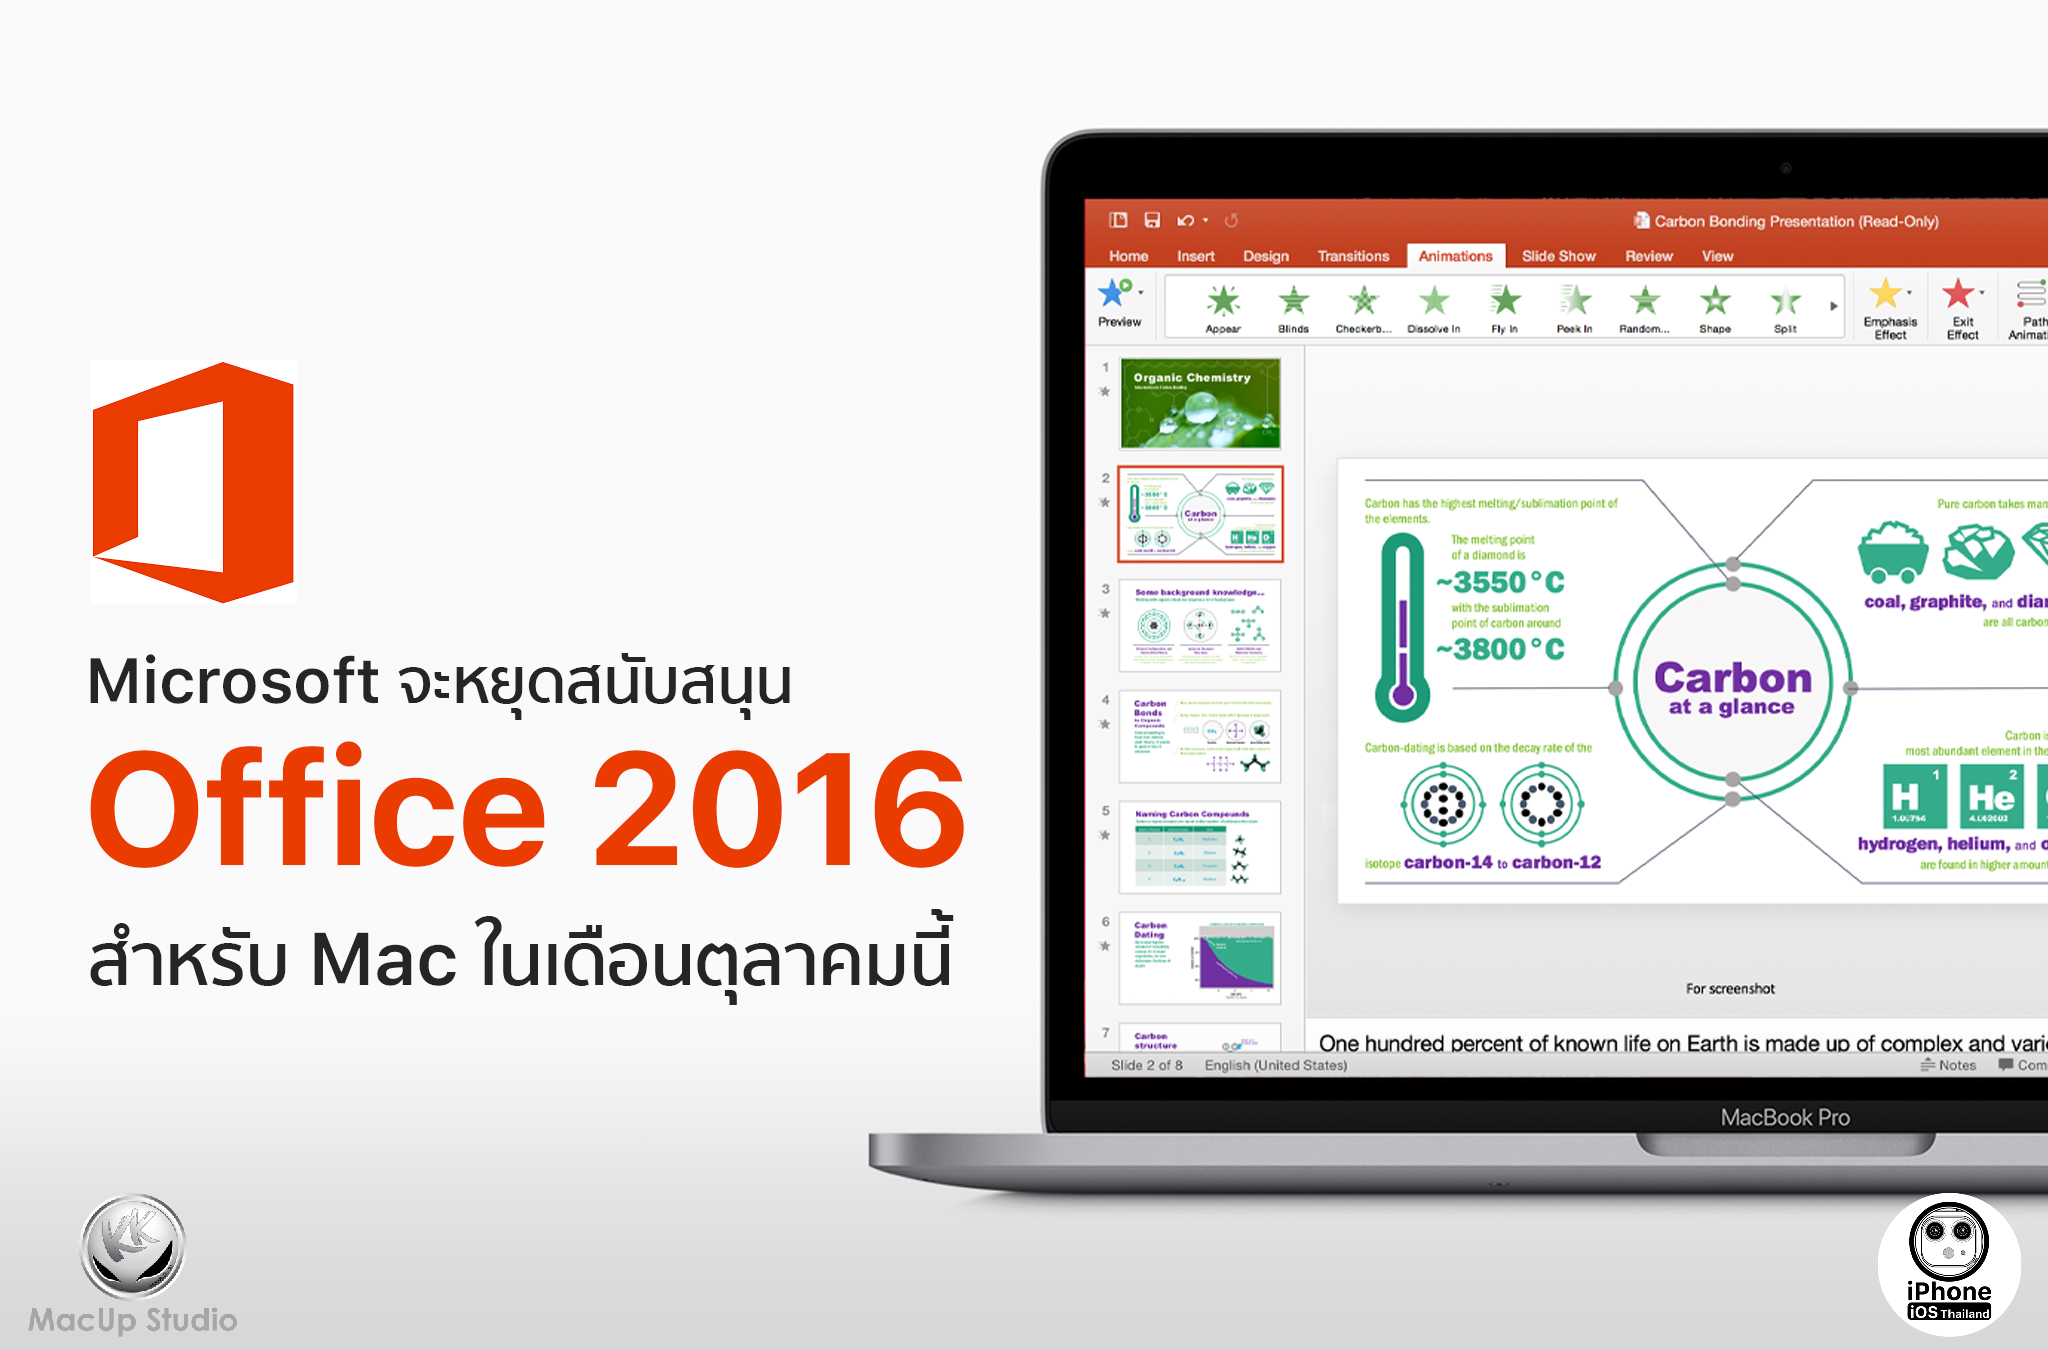 office 365 or office 2016 for mac